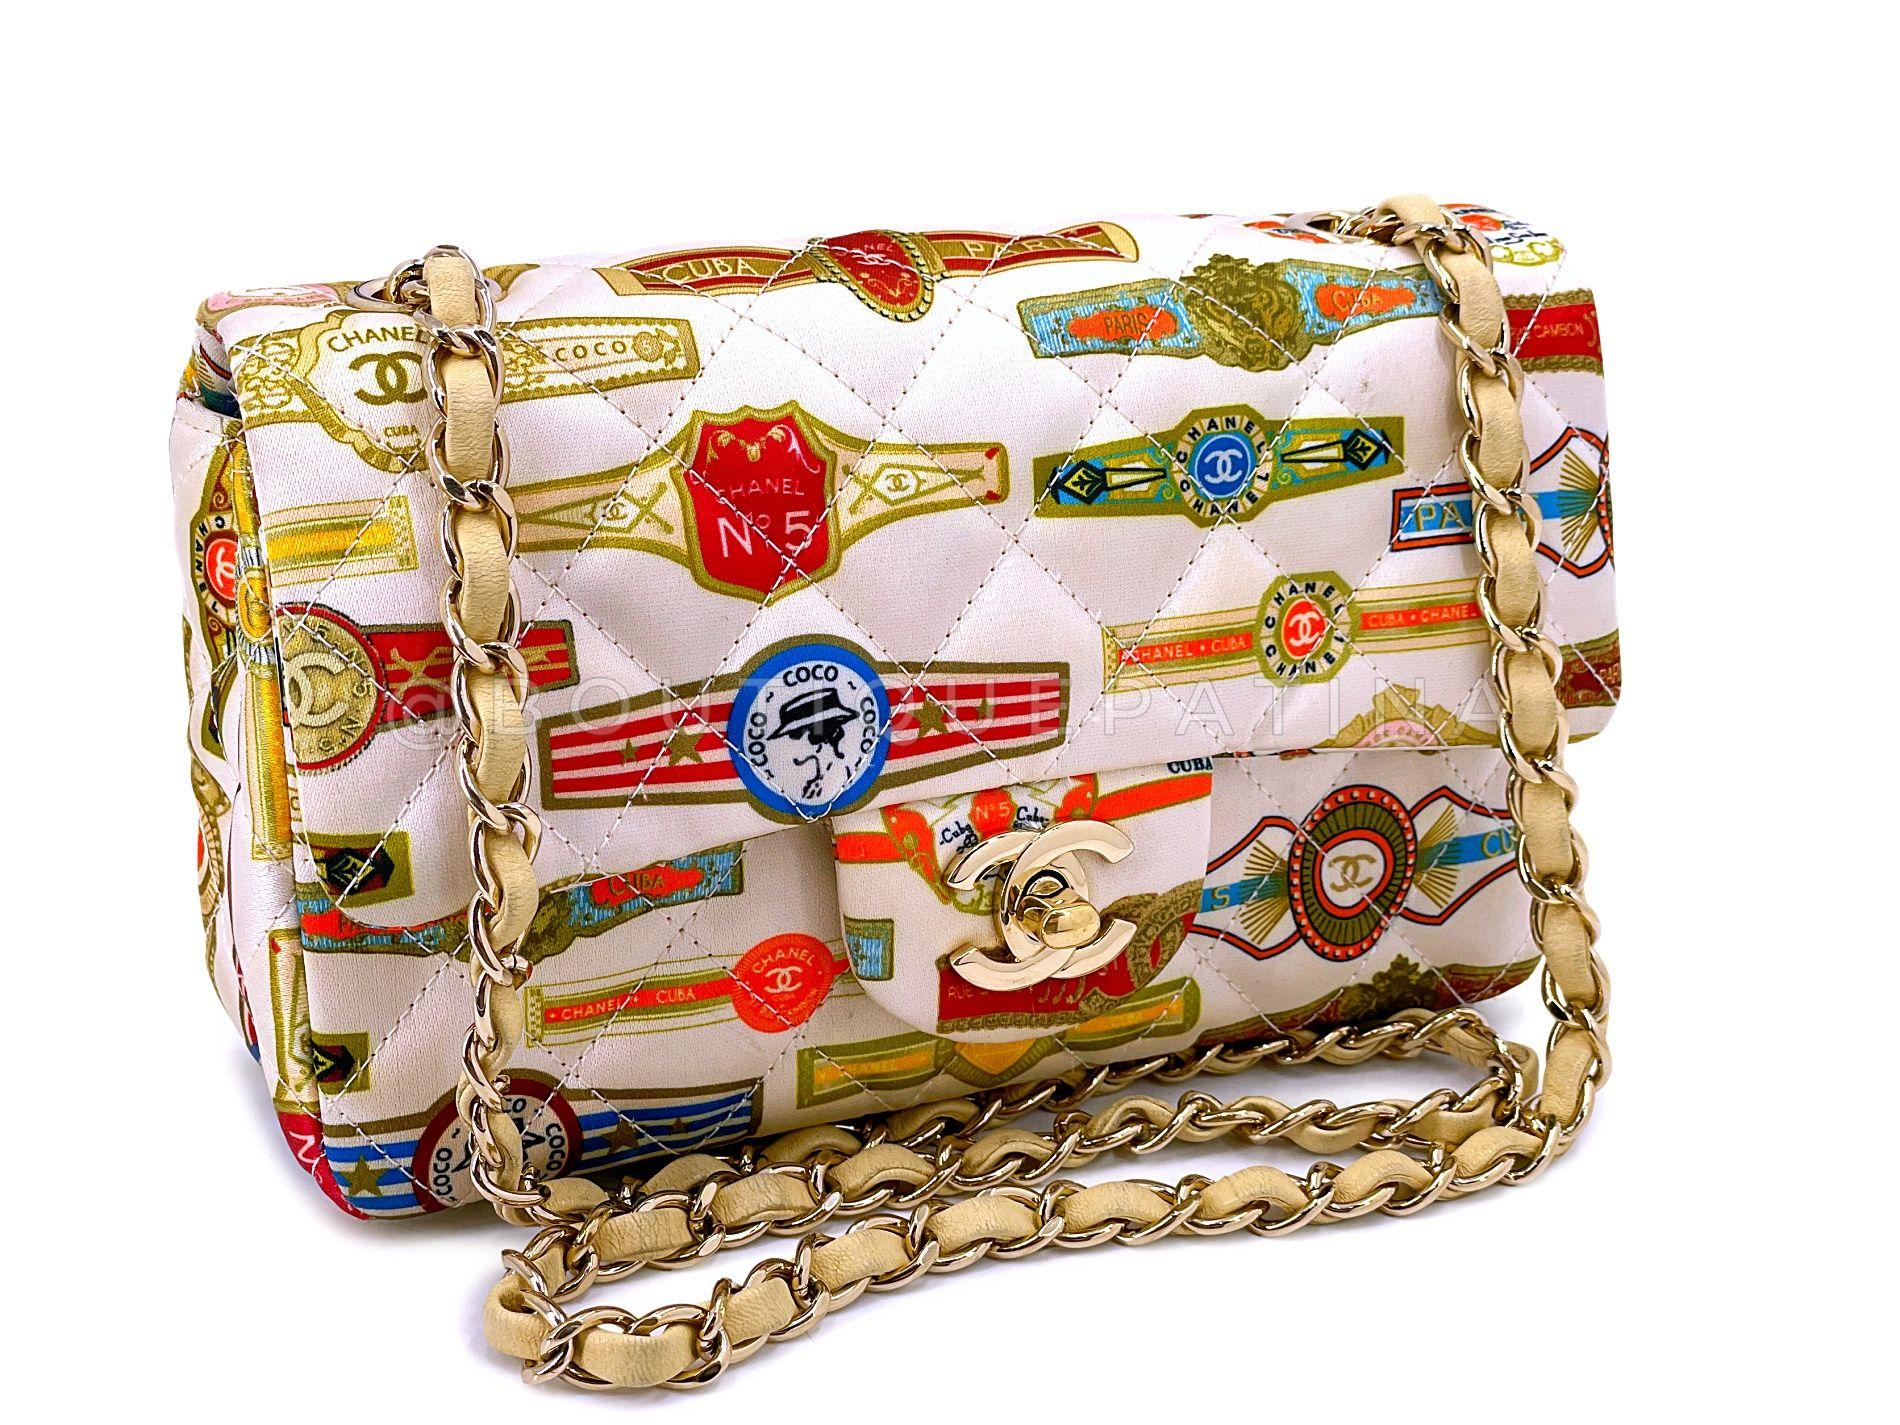 Store item: 68070
A limited release from Karl Lagerfeld's 2017 Cruise Coco Cuba runway collection is this rectangular mini flap bag. 

With whimsical Cuba-themed multicolor print, and a beige lambskin woven chain strap in light gold hardware. 

For